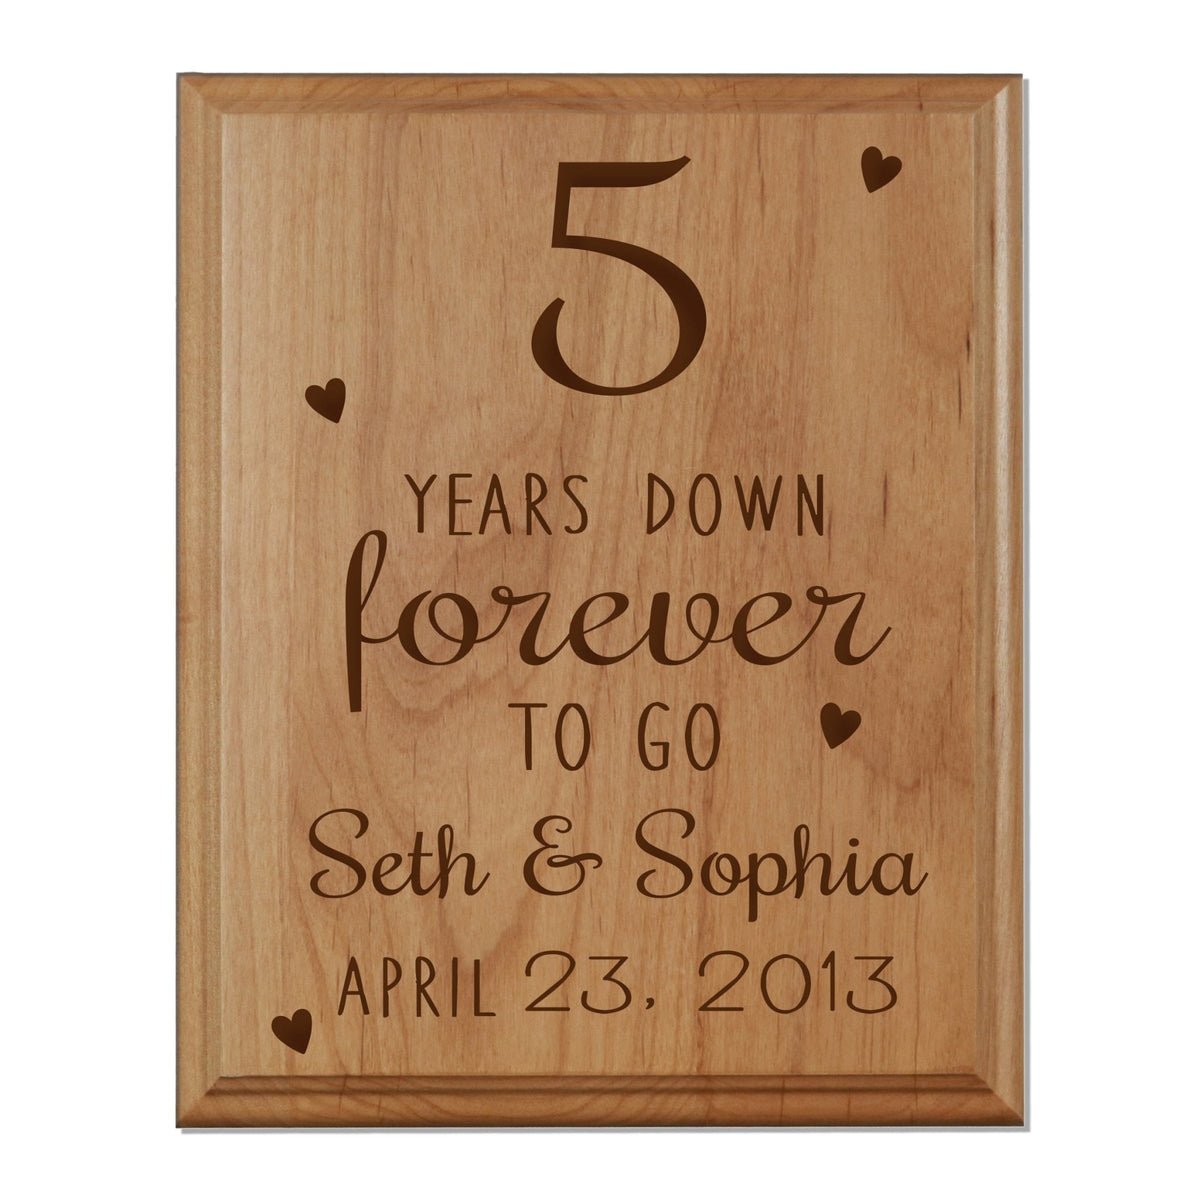 Personalized 8x10 Anniversary Plaques - 5 Year Down - LifeSong Milestones